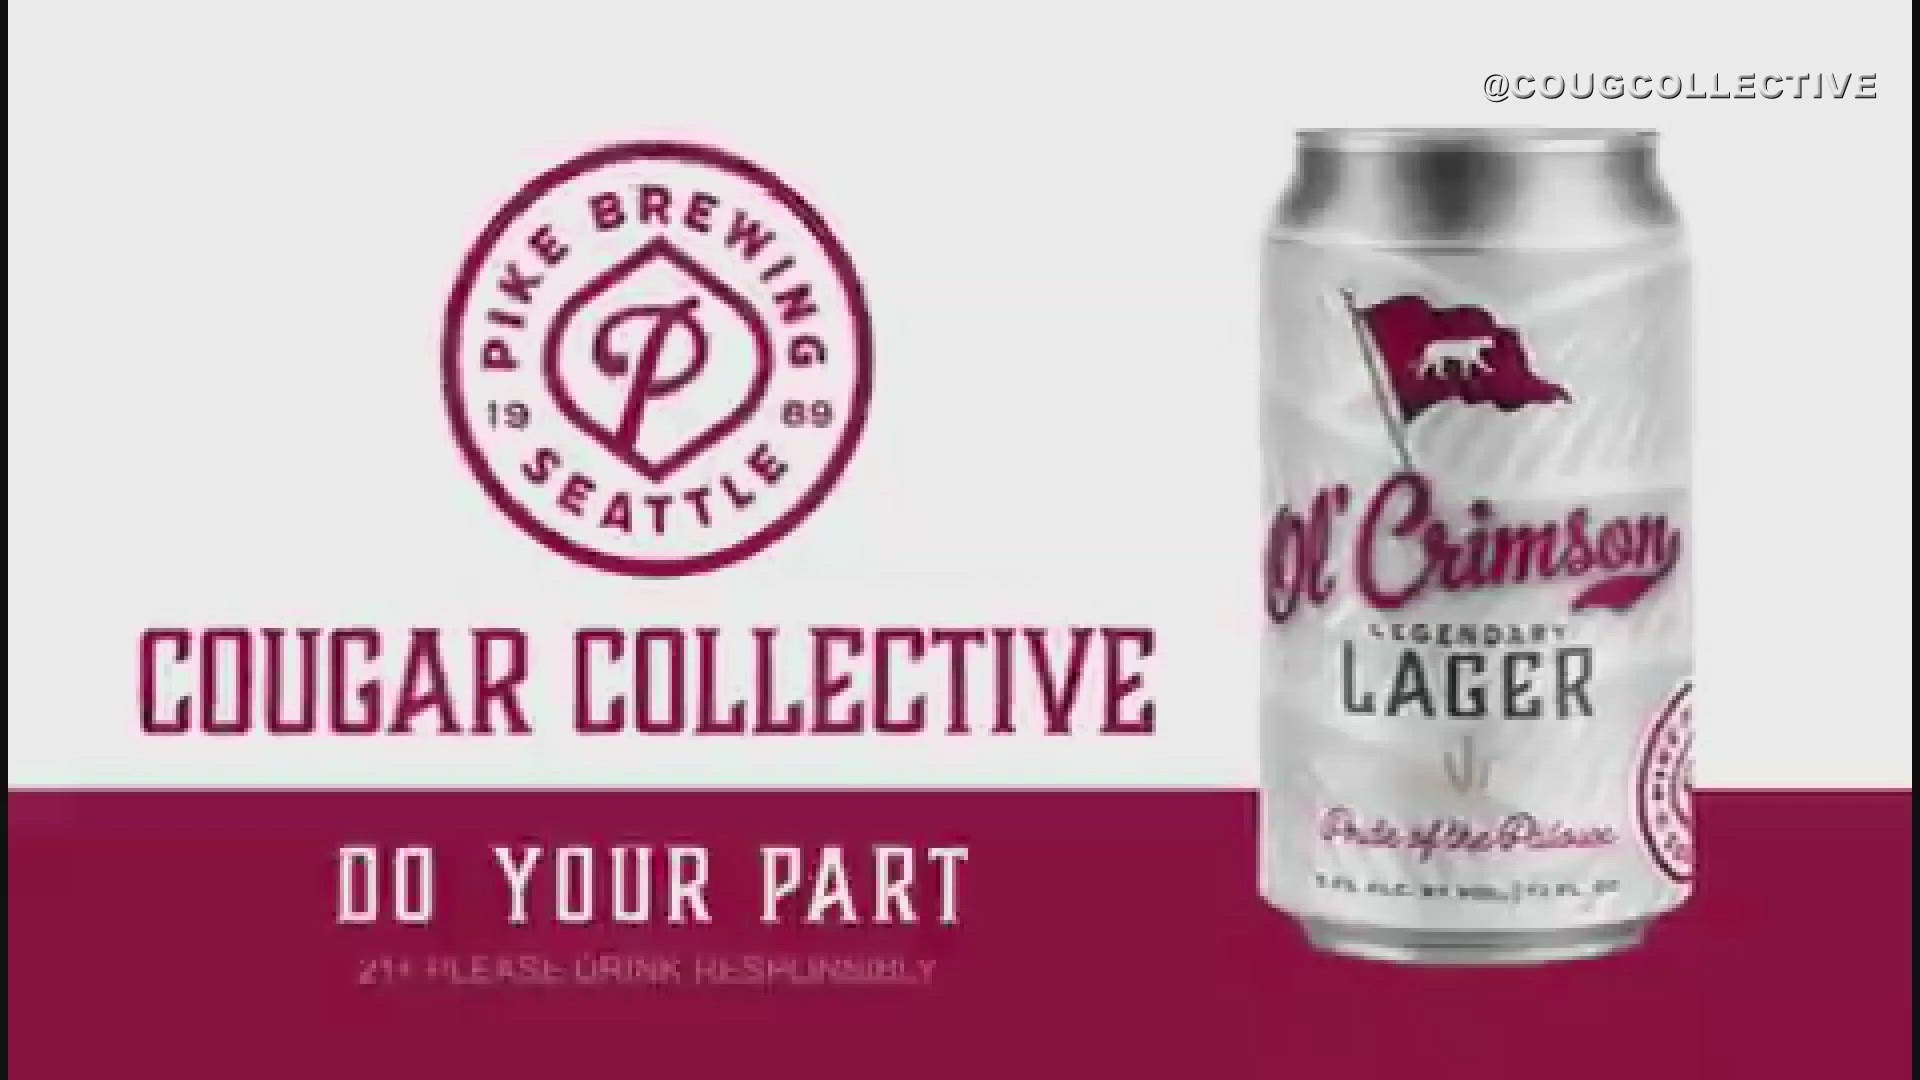 The Cougar Collective announced the collaboration between Pike Brewing in Seattle and Ol' Crimson to introduce the "Ol' Crimson lager" to the world.